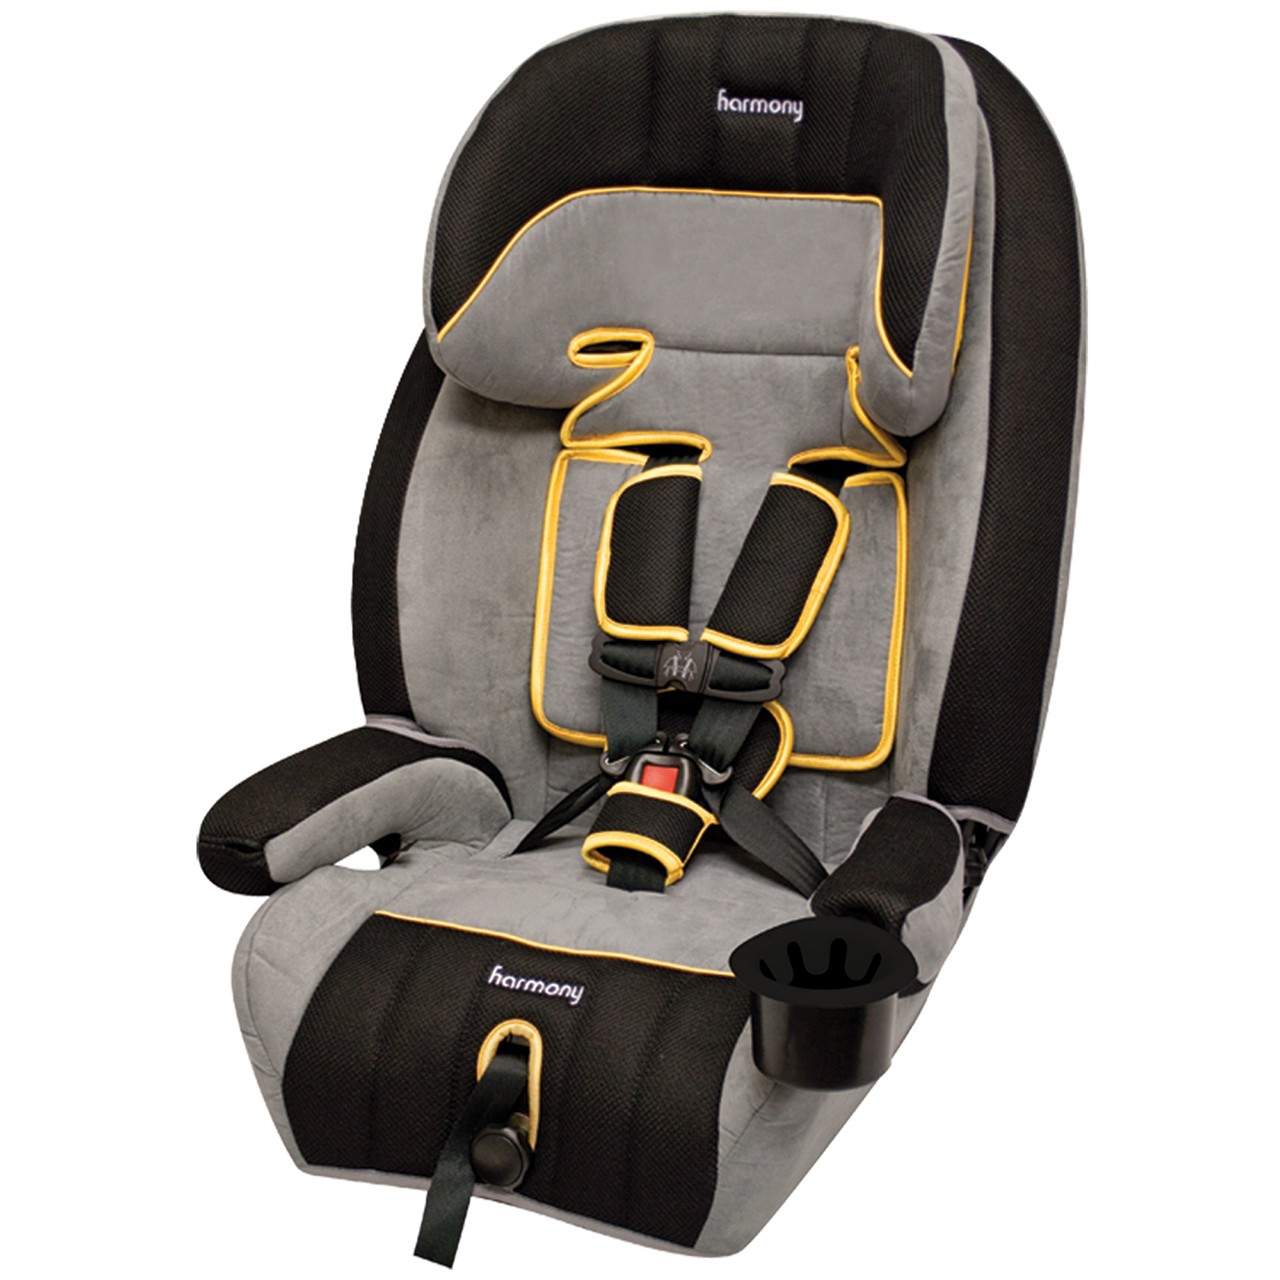 Defender 360° 3-in-1 Combination Deluxe Car Seat - Pirate Gold